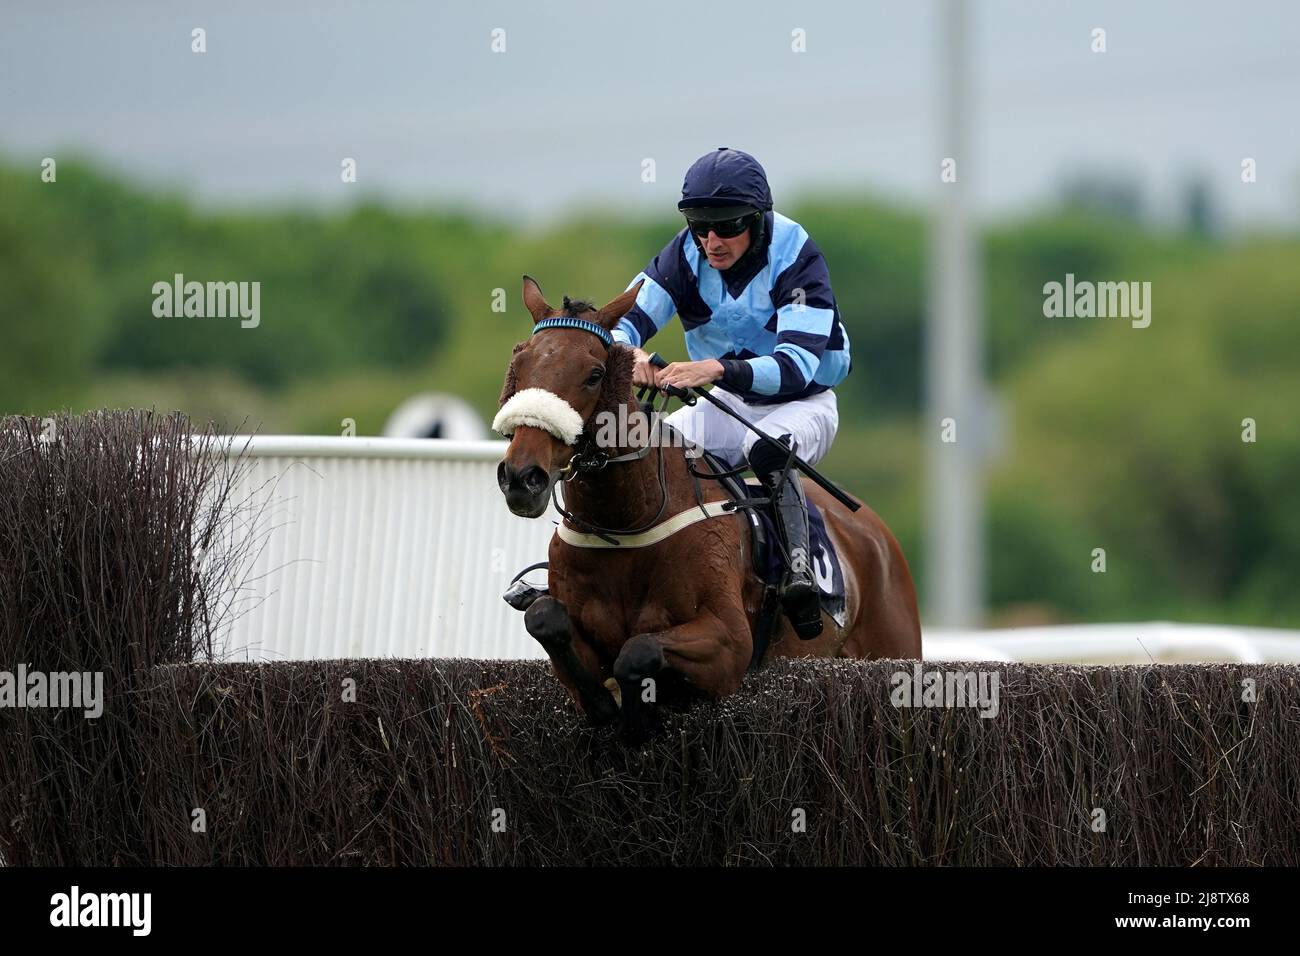 Loughermore ridden by William Shanahan goes on to win the Ryley Wealth Management Novices' Handicap Chase (GBB Race) at Southwell racecourse, Nottinghamshire. Picture date: Wednesday May 18, 2022. Stock Photo